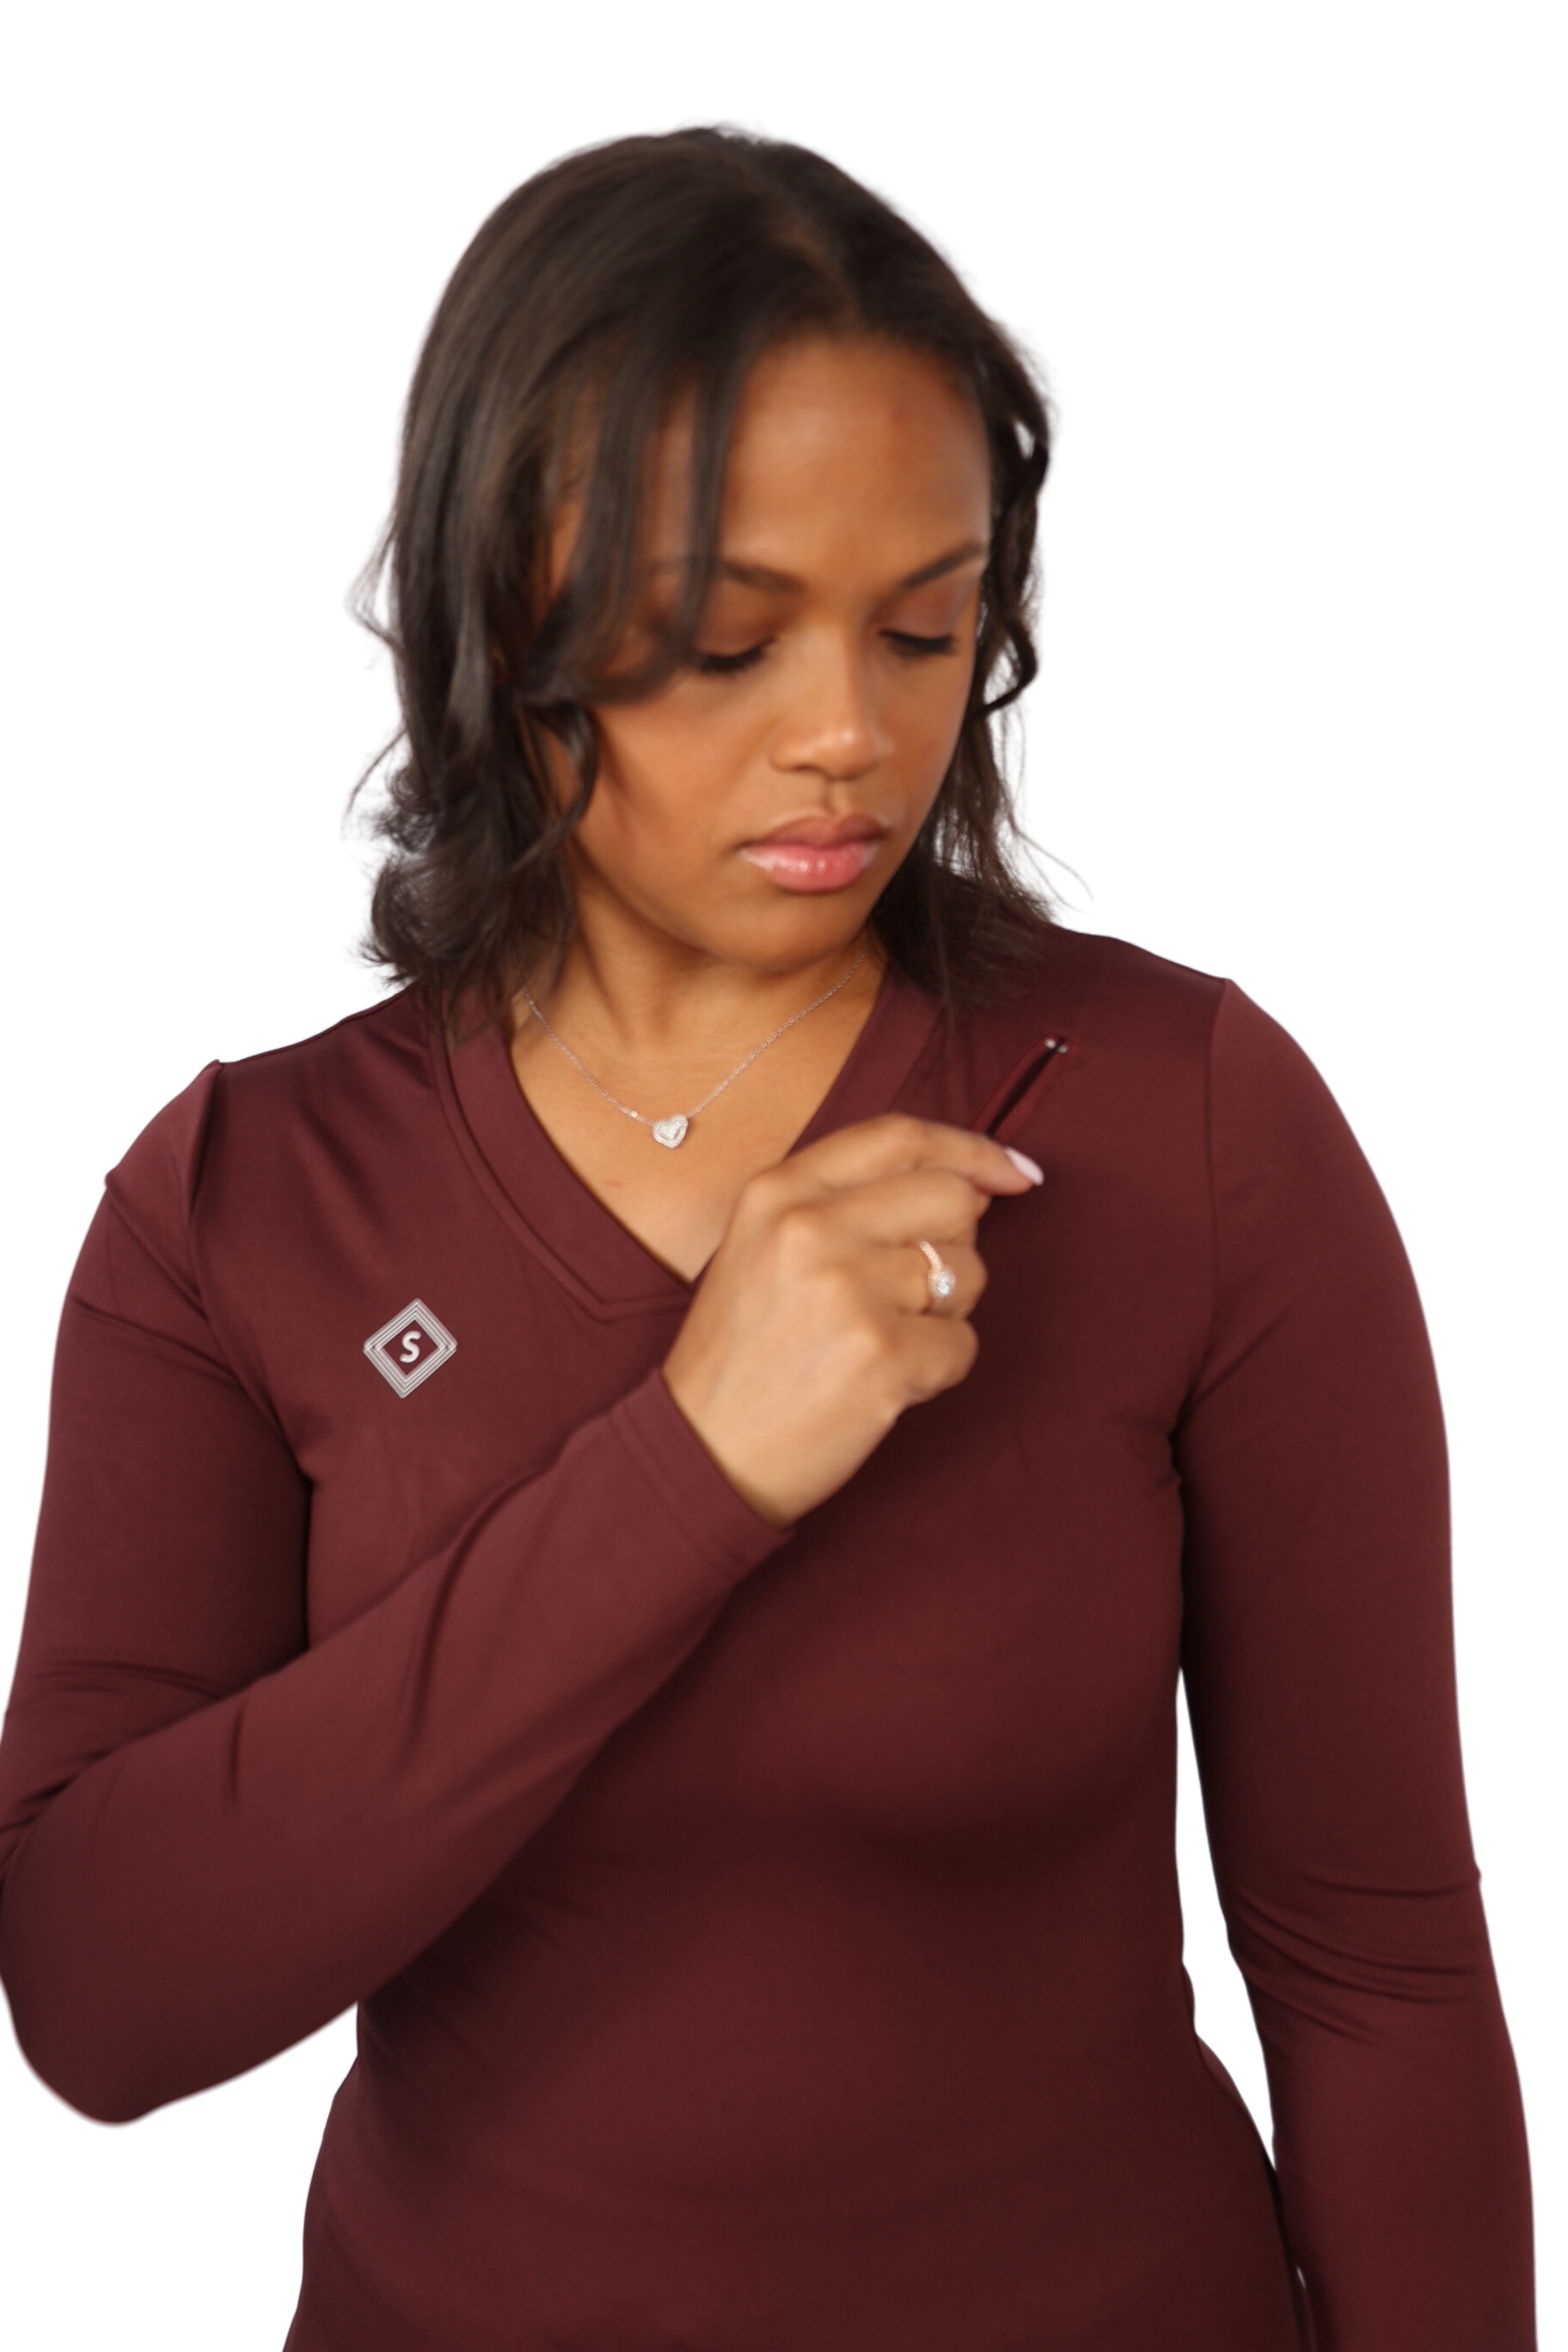 best undershirts black underscrub tee figs underscrubs healing hands underscrubs for women best underscrubs for nurses underscrub tank top womens underscrubs long sleeve best long sleeve shirts for under scrubs underscrubs t-shirt underscrub best undershirt for scrubs long sleeve under scrubs what to wear under scrub pants best gift for nurses and doctors best secret santa gift for nurses tattoo coverage best ways to keep your ring safe don’t lose your wedding ring burgundy long sleeve underscrub warm